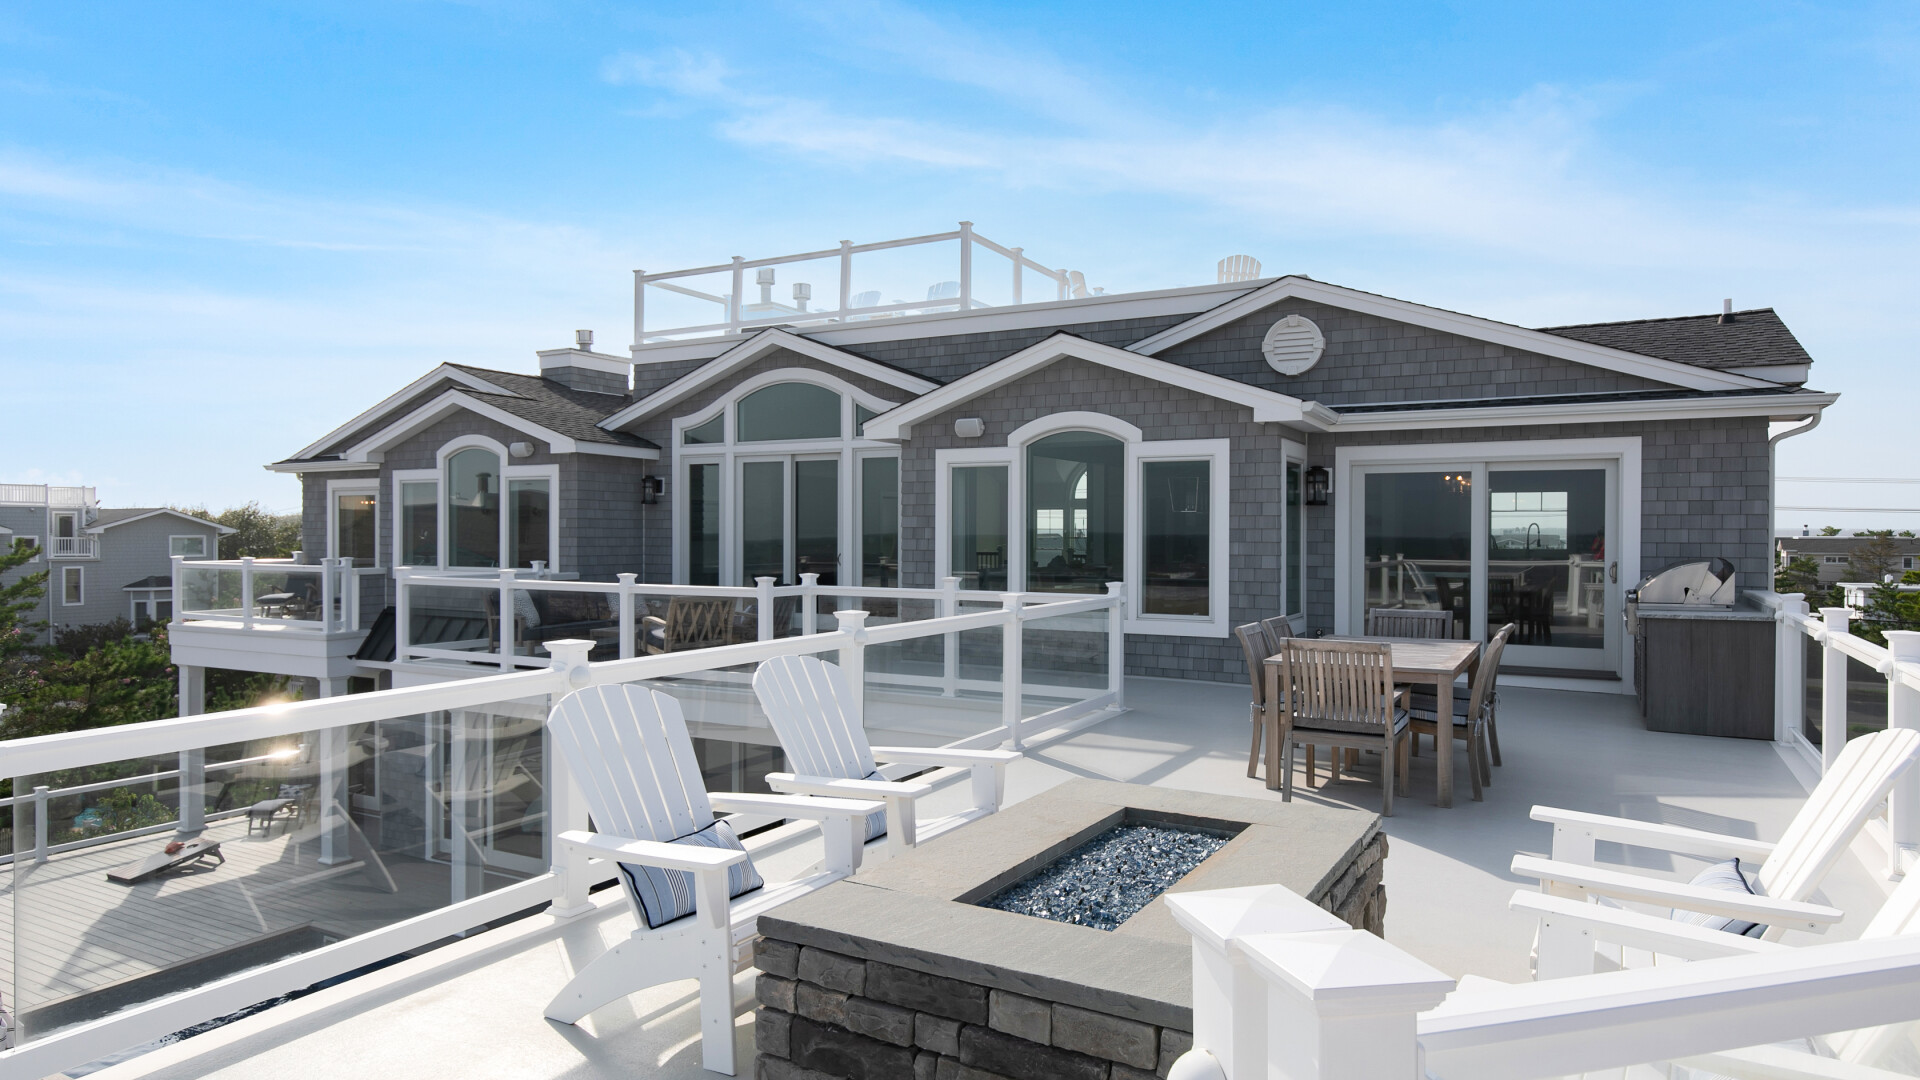 Luxury beach estate boasting a roof deck perfect for sunset viewing, Long Beach Island NJ